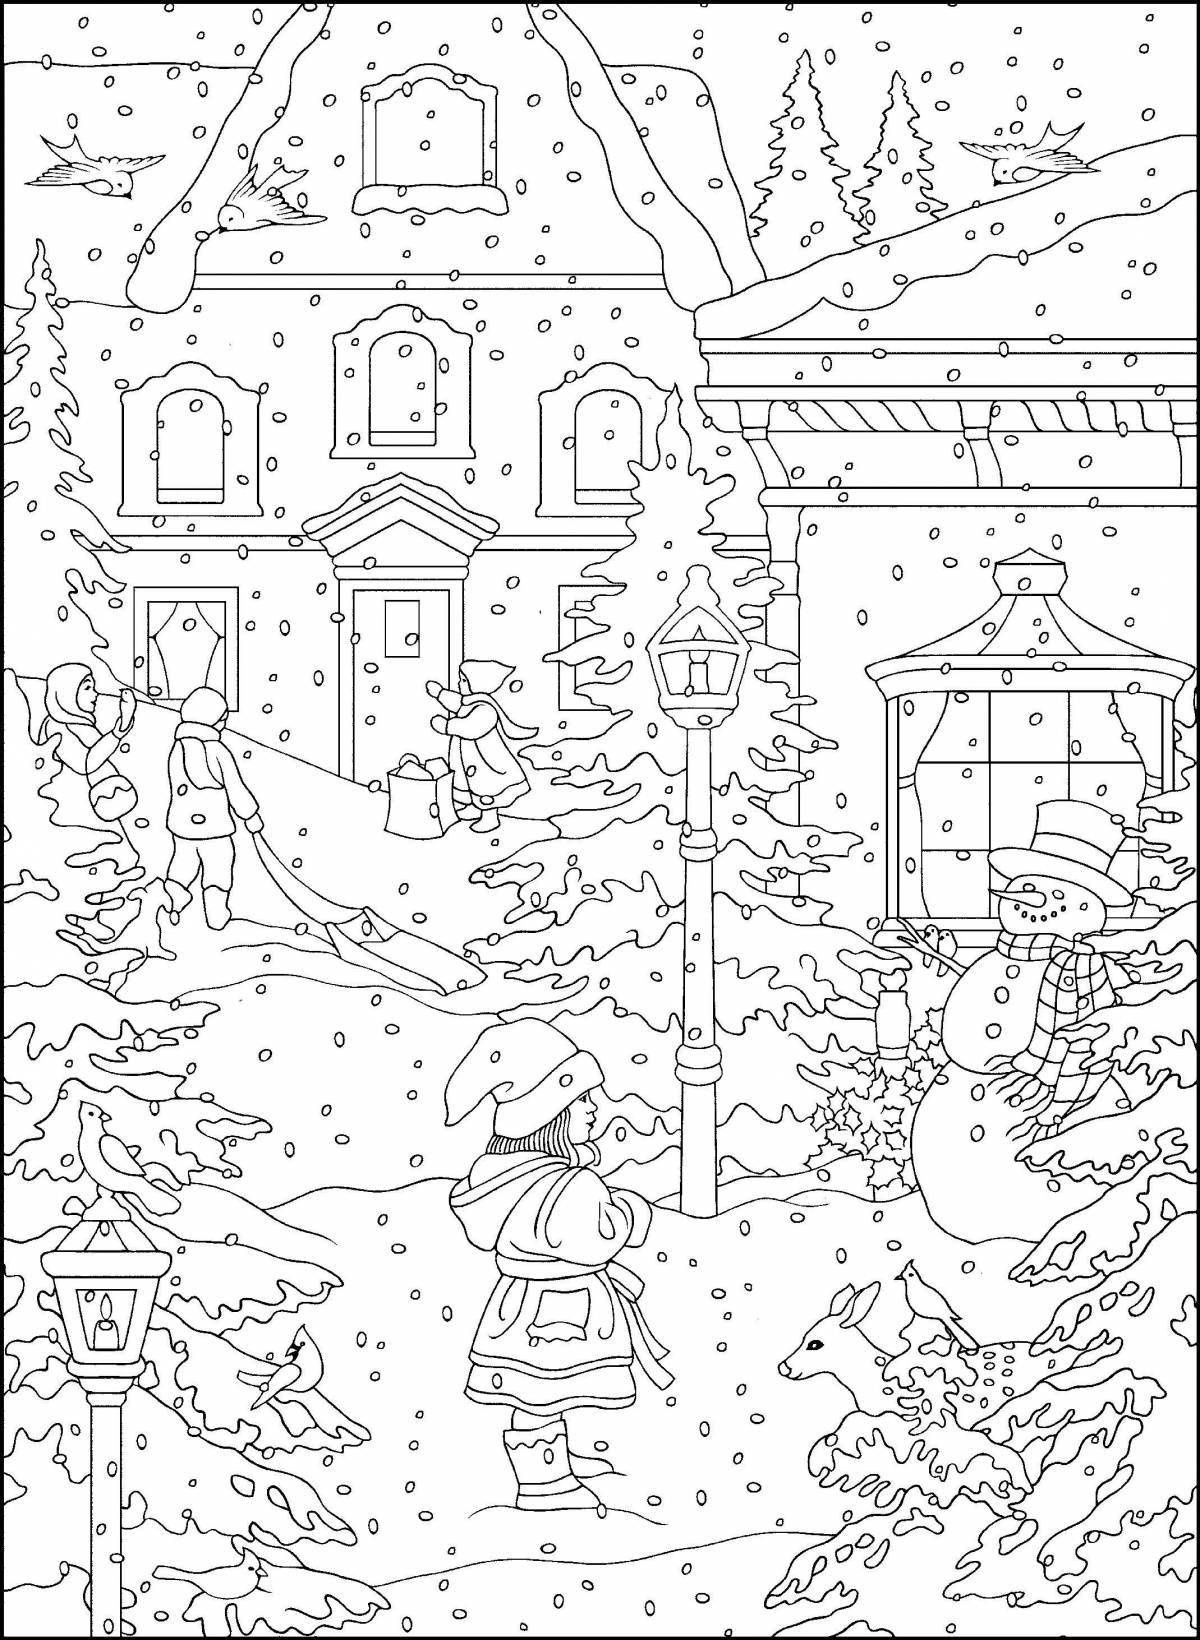 Calm winter landscape coloring book for children 10 years old